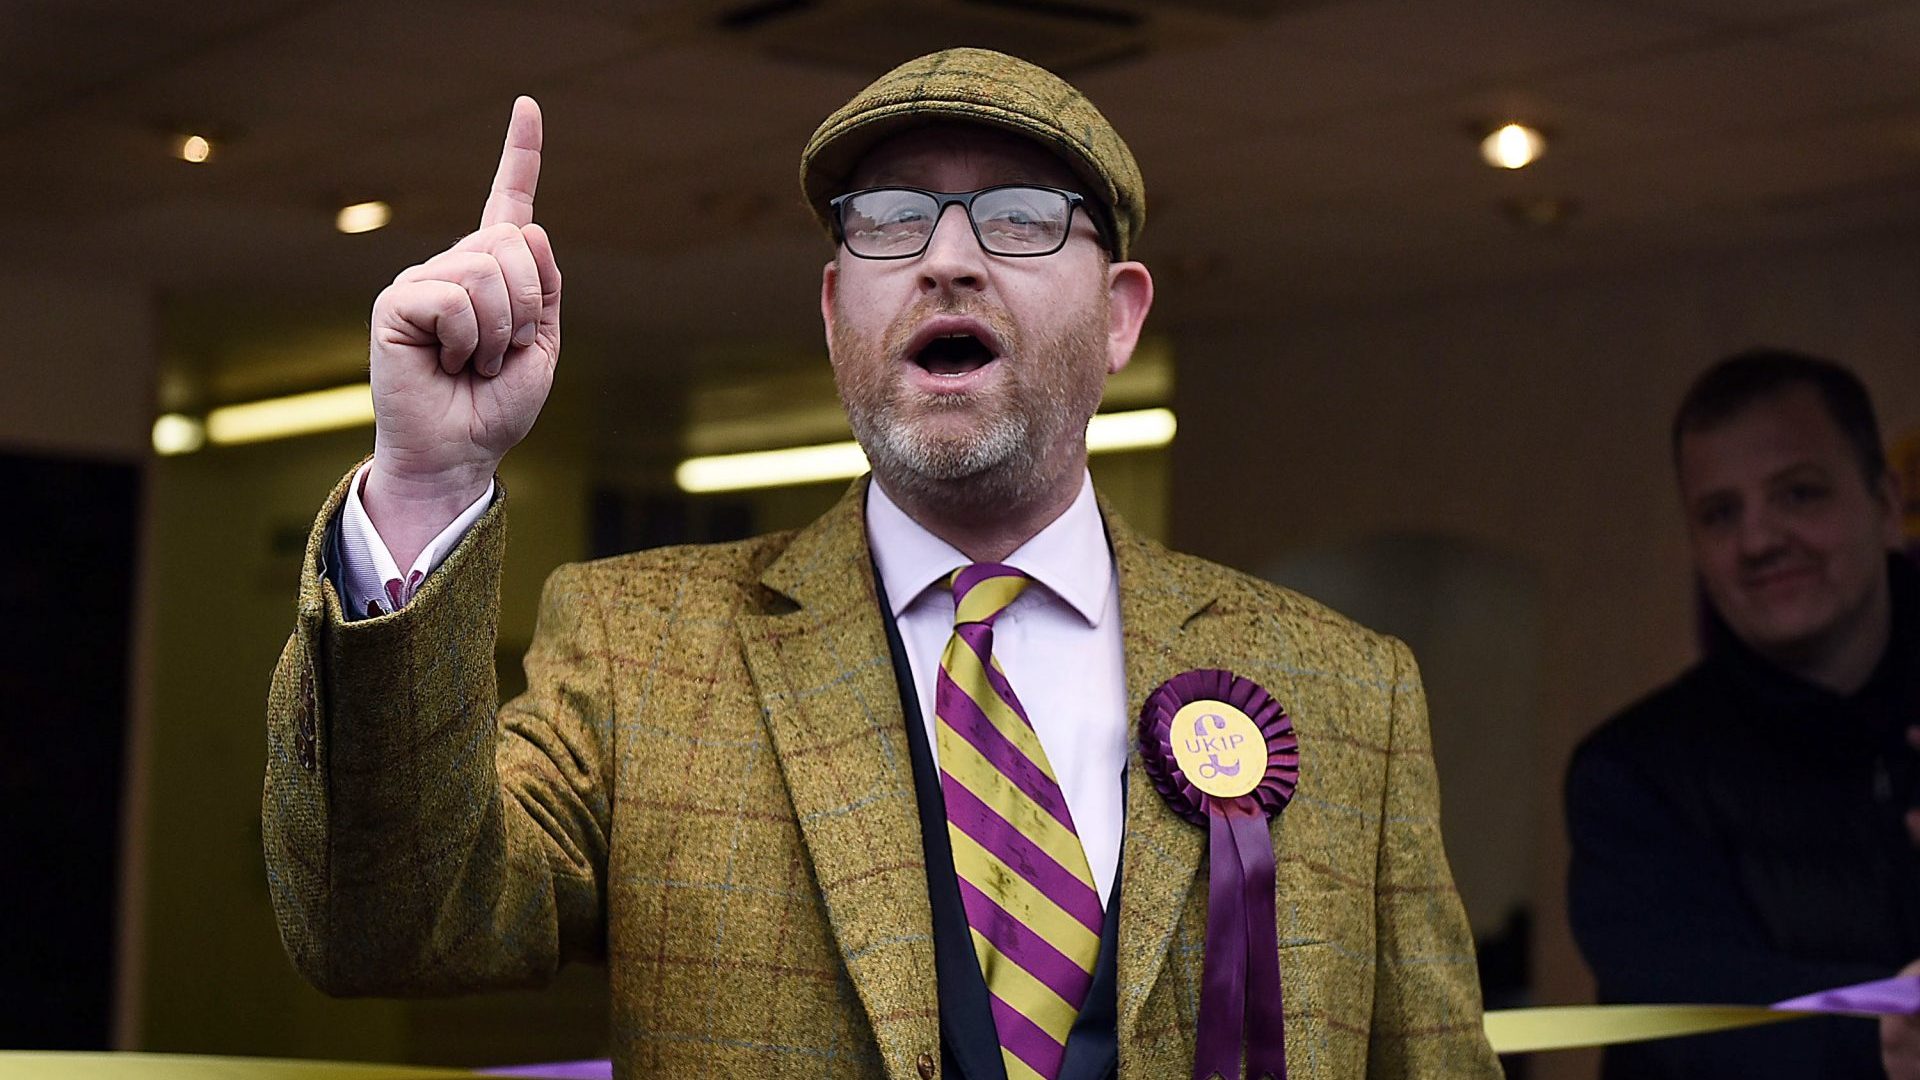 Paul Nuttall, former leader of UKIP, when he launched his campaign to be the Member of Parliament for the constituency of Stoke Central outside the UKIP shop, in 2017. Photo: Mary Turner/Getty Images